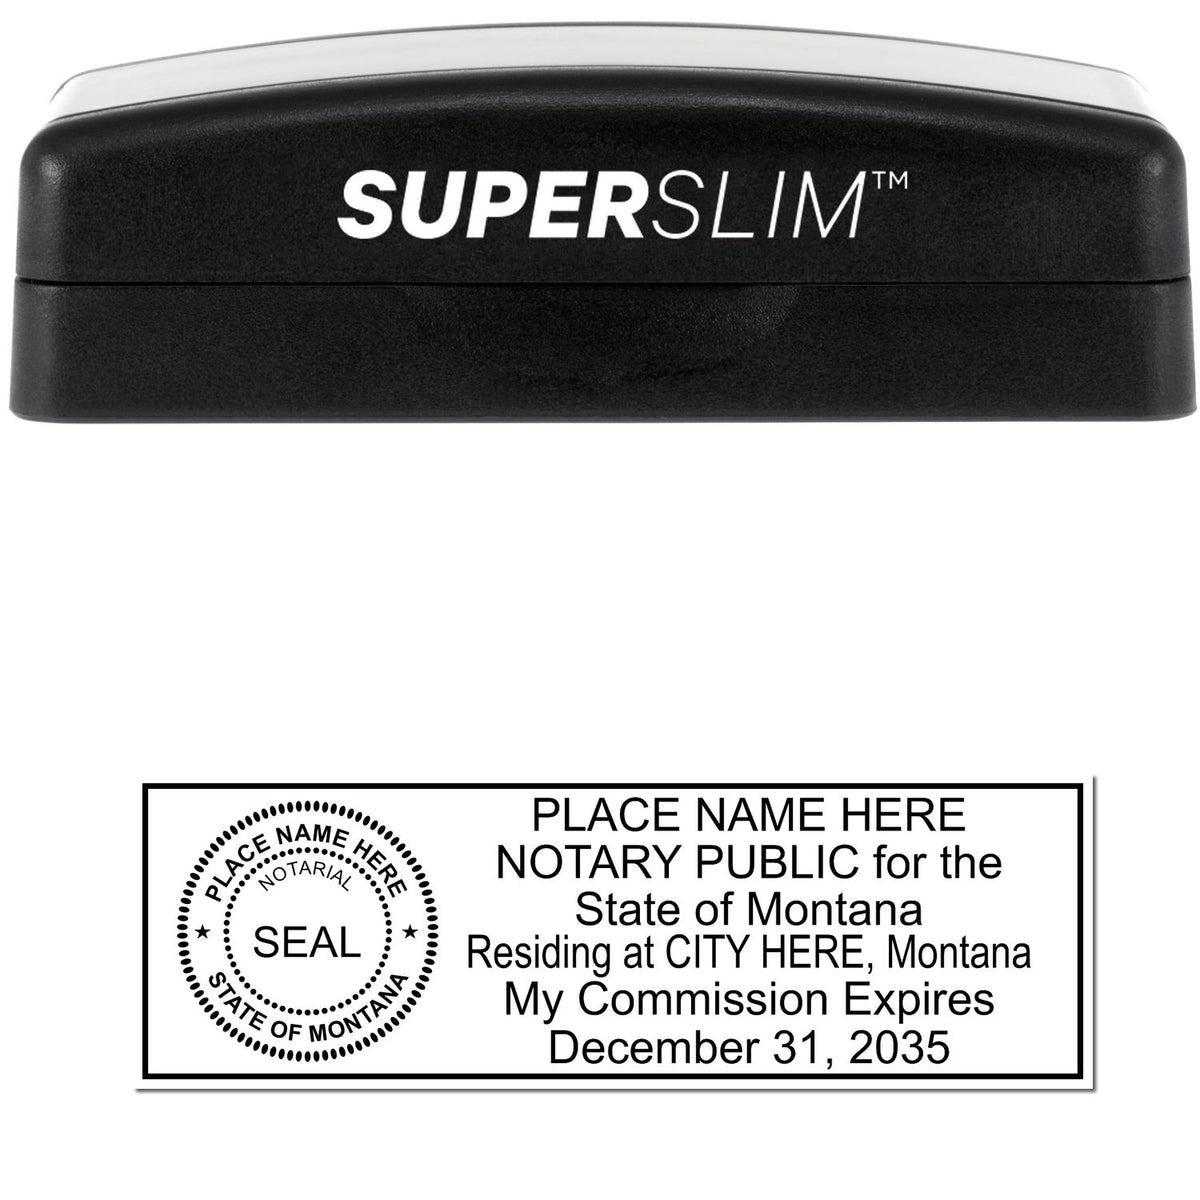 The main image for the Super Slim Montana Notary Public Stamp depicting a sample of the imprint and electronic files